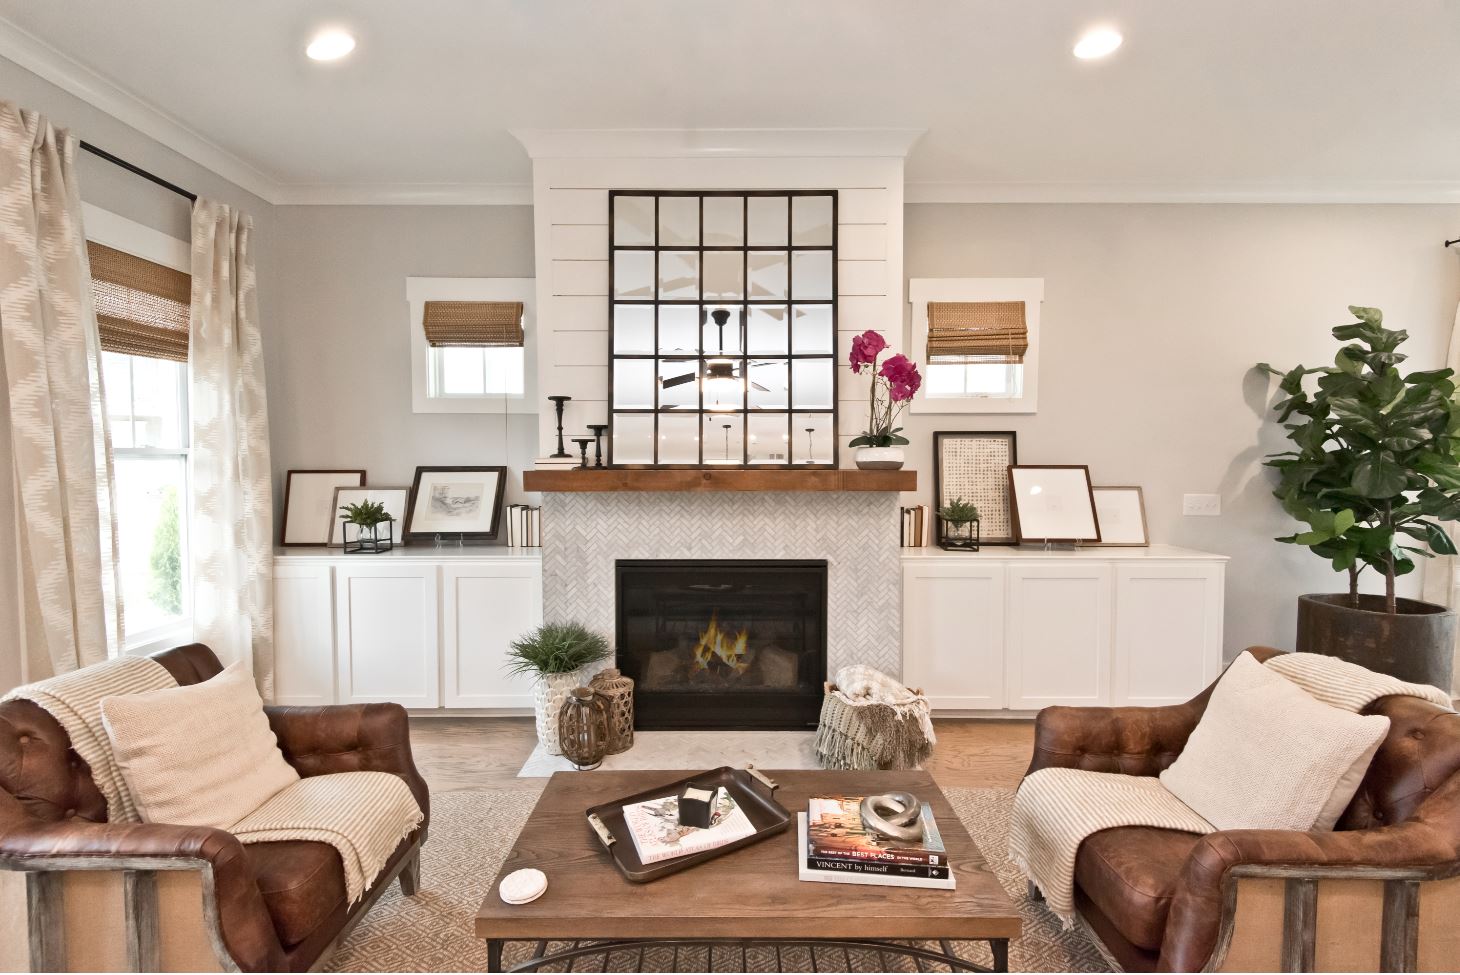 Fireplaces with a bold combination of patterns and textures add character to your home.